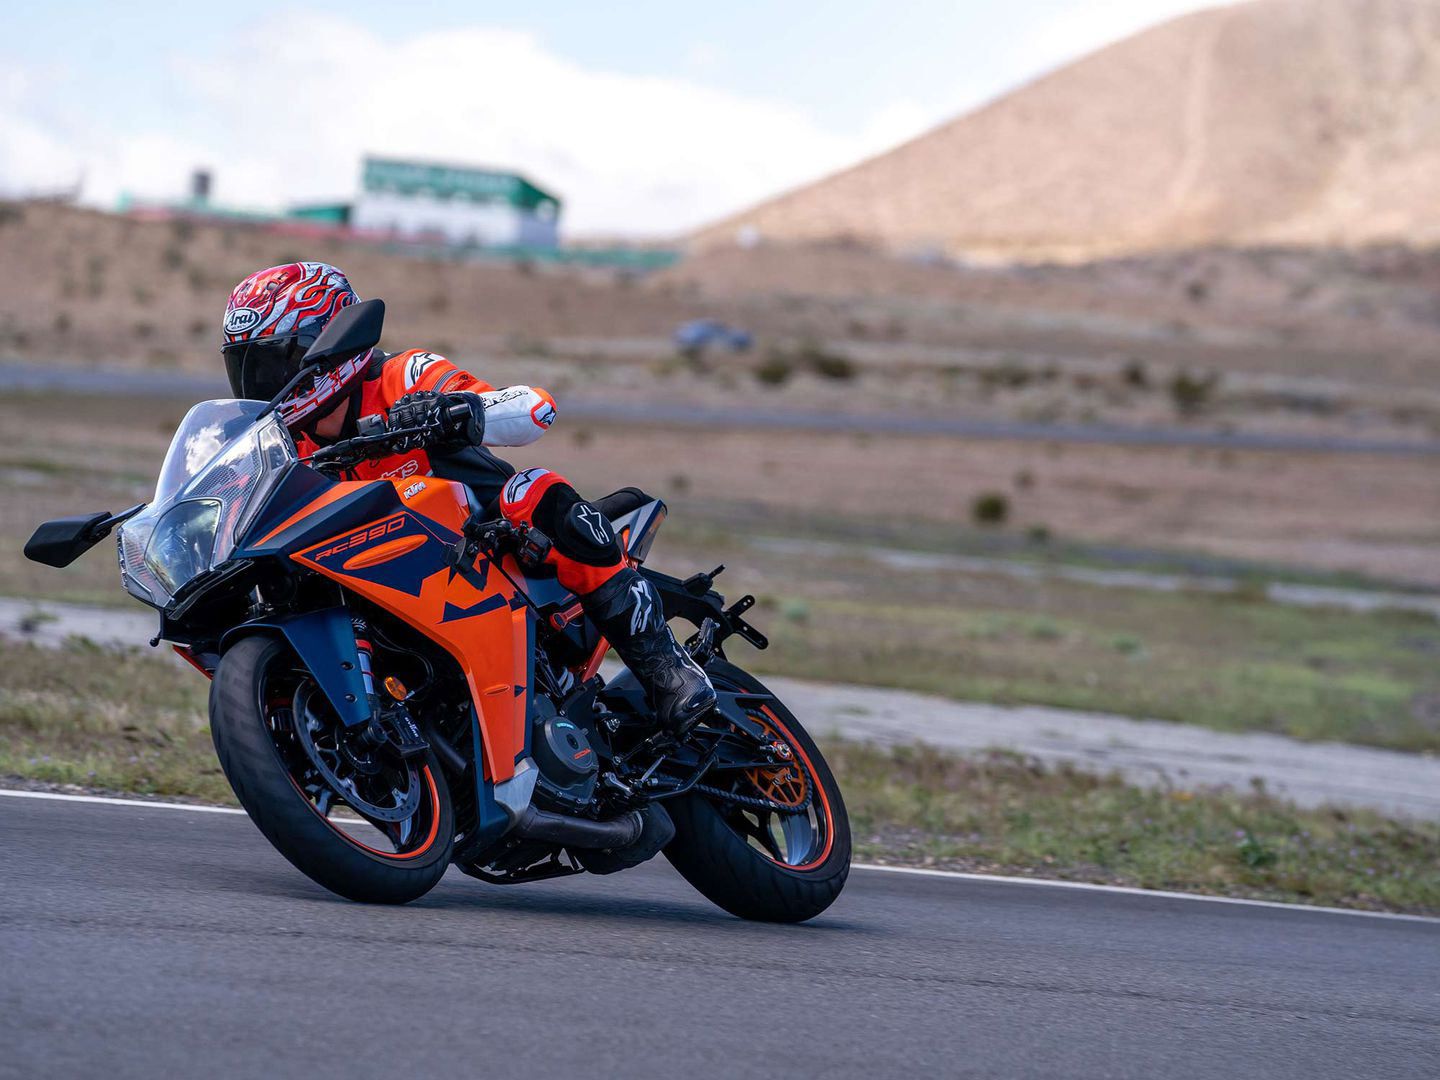 While the RC 390 is an excellent bike for around-town riding, it’s hard to not have thoughts about heading to the track thanks to its superb handling and lively single-cylinder engine.